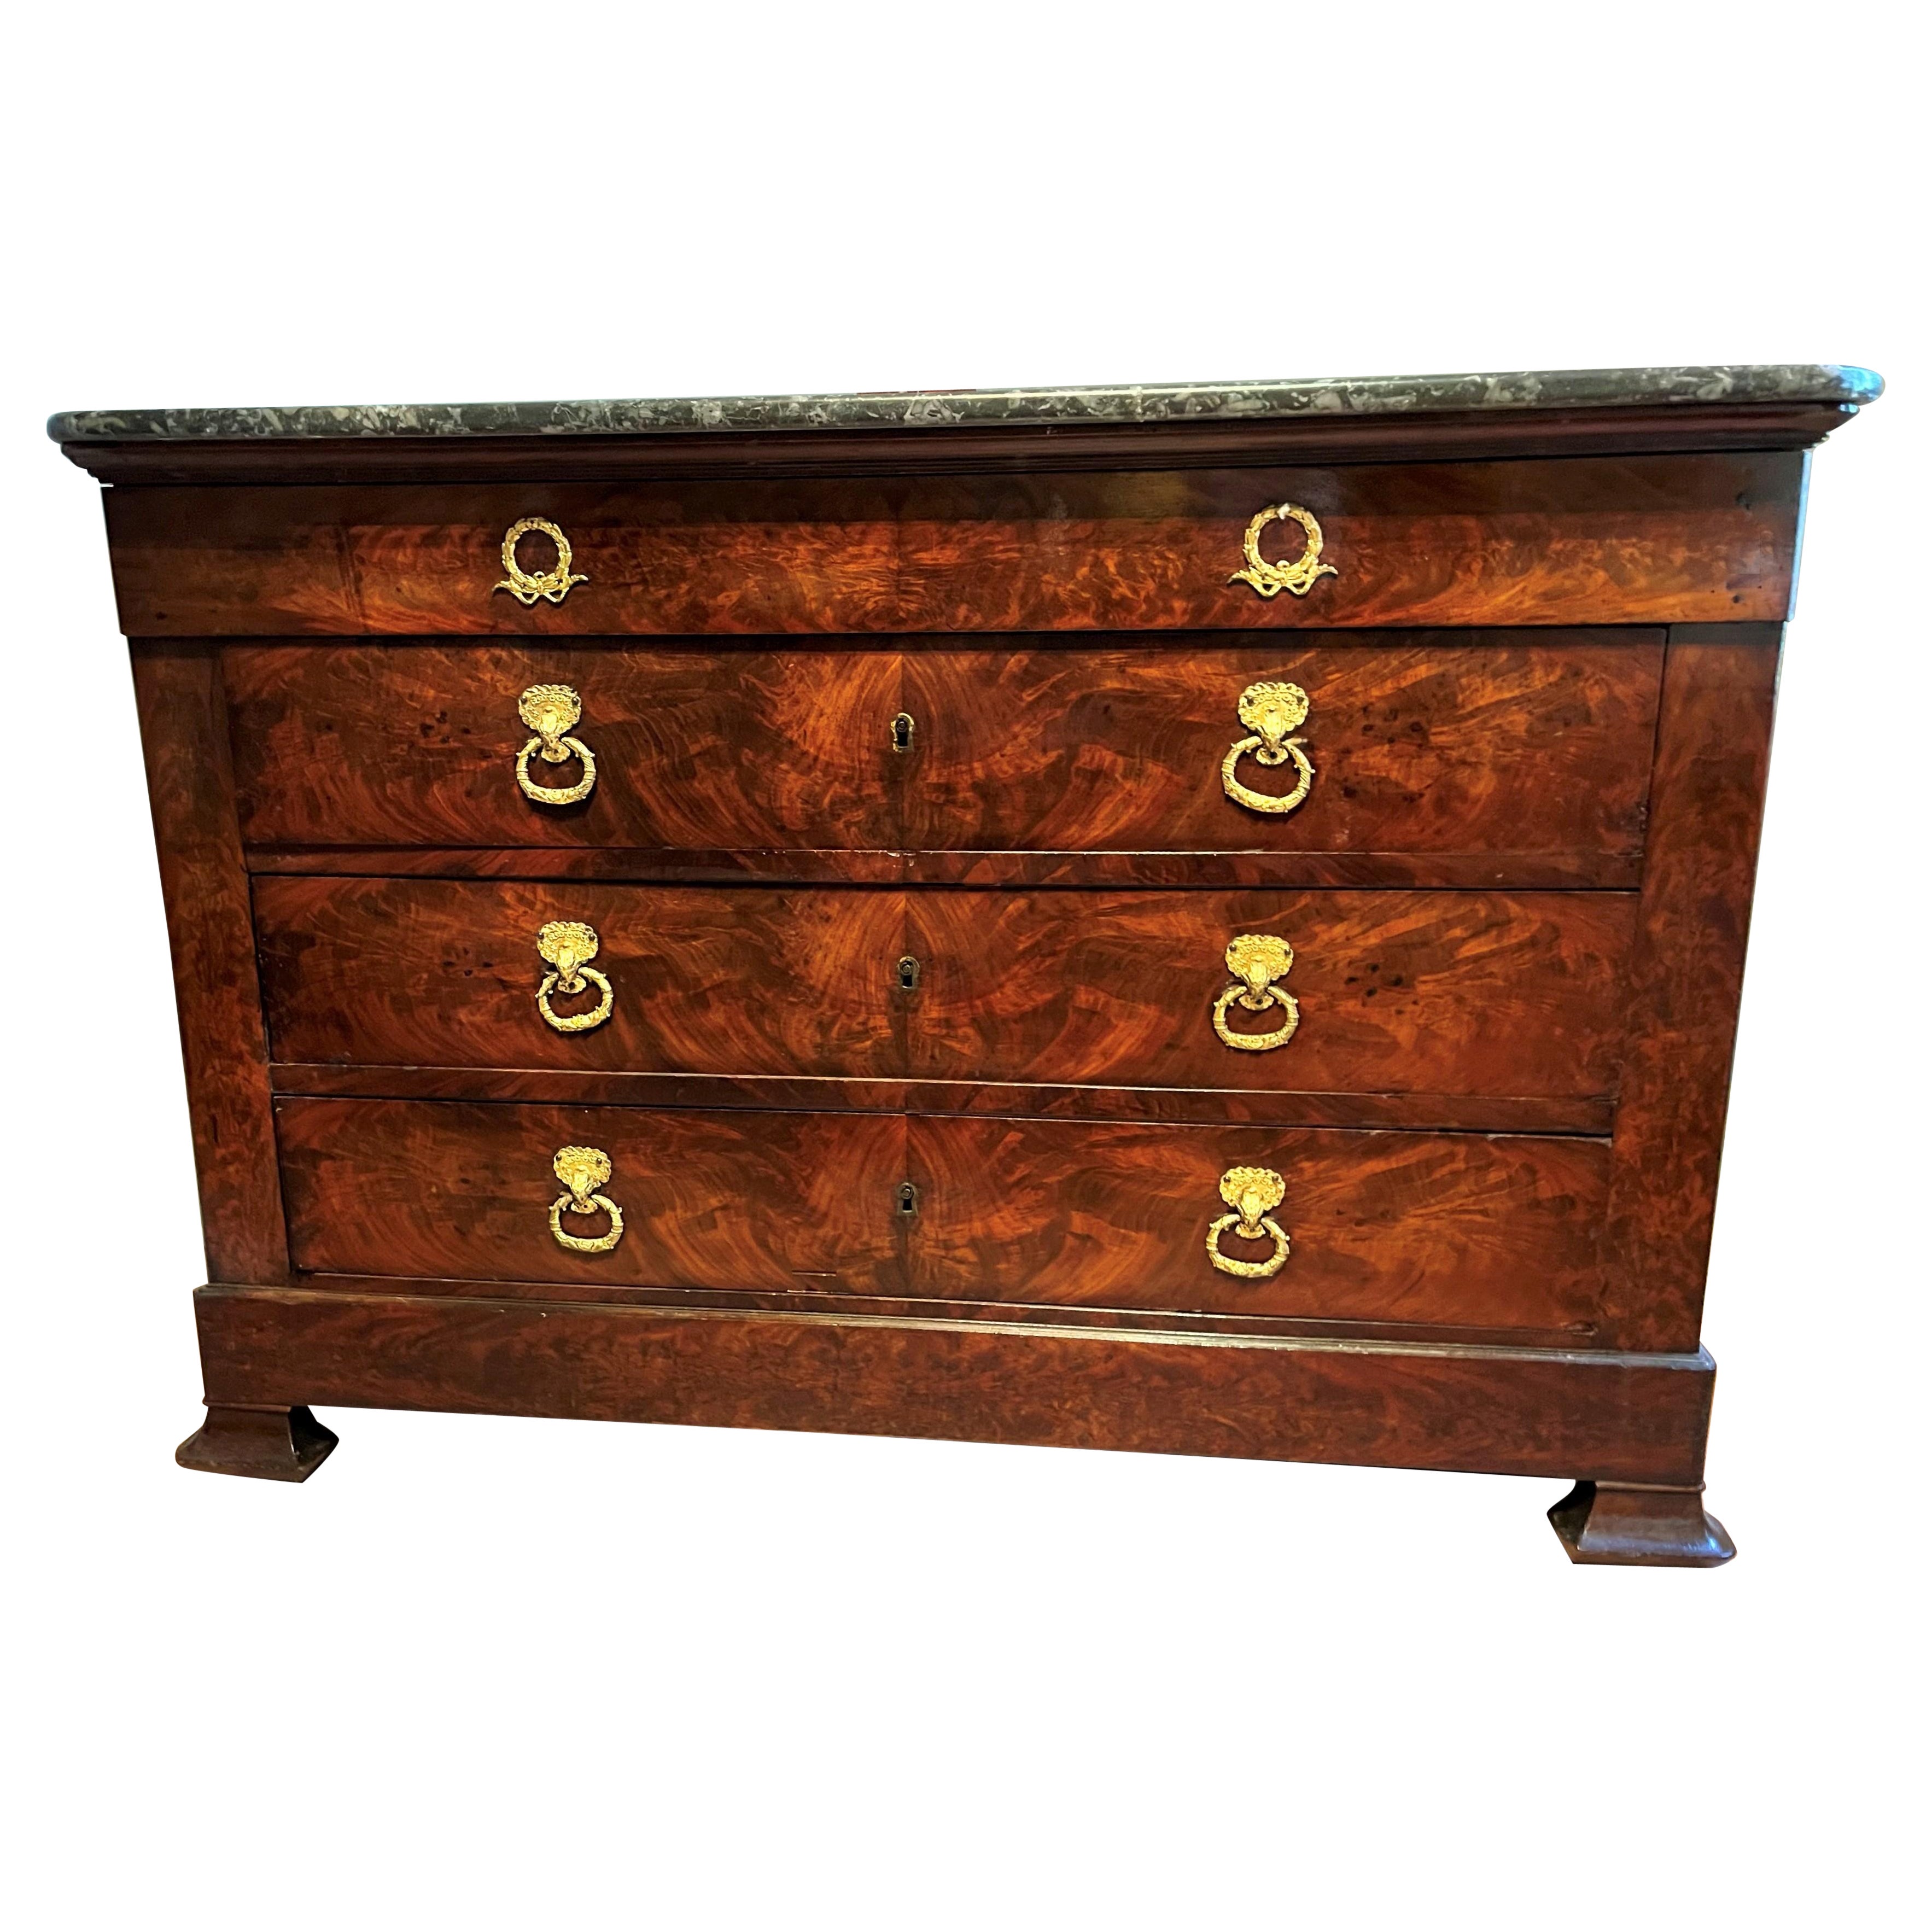 Stamped in each front corner ' MAIGRET ' ( Alexandre). Unusual in that the drawer veneers are the rare, highly figured crotch mahogany as opposed to the more common flame mahogany. Gilded mounts with hand hewn marble top .This chest has secondary